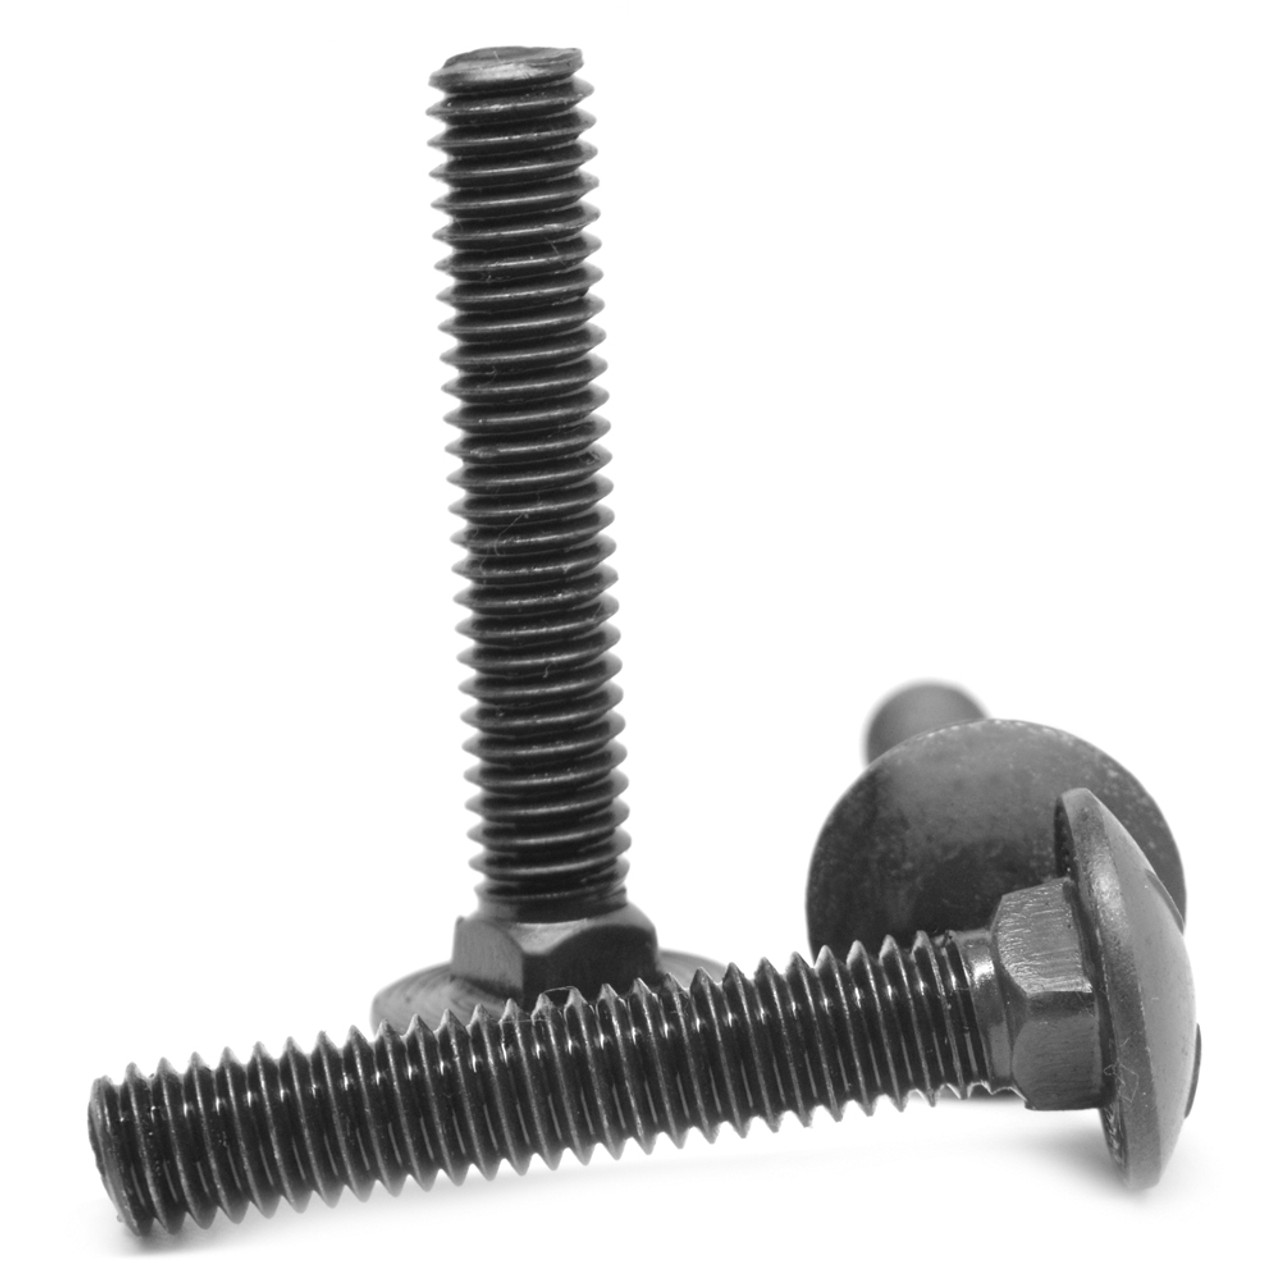 1/4-20 x 5 Coarse Thread Carriage Bolt Low Carbon Steel Black Oxide